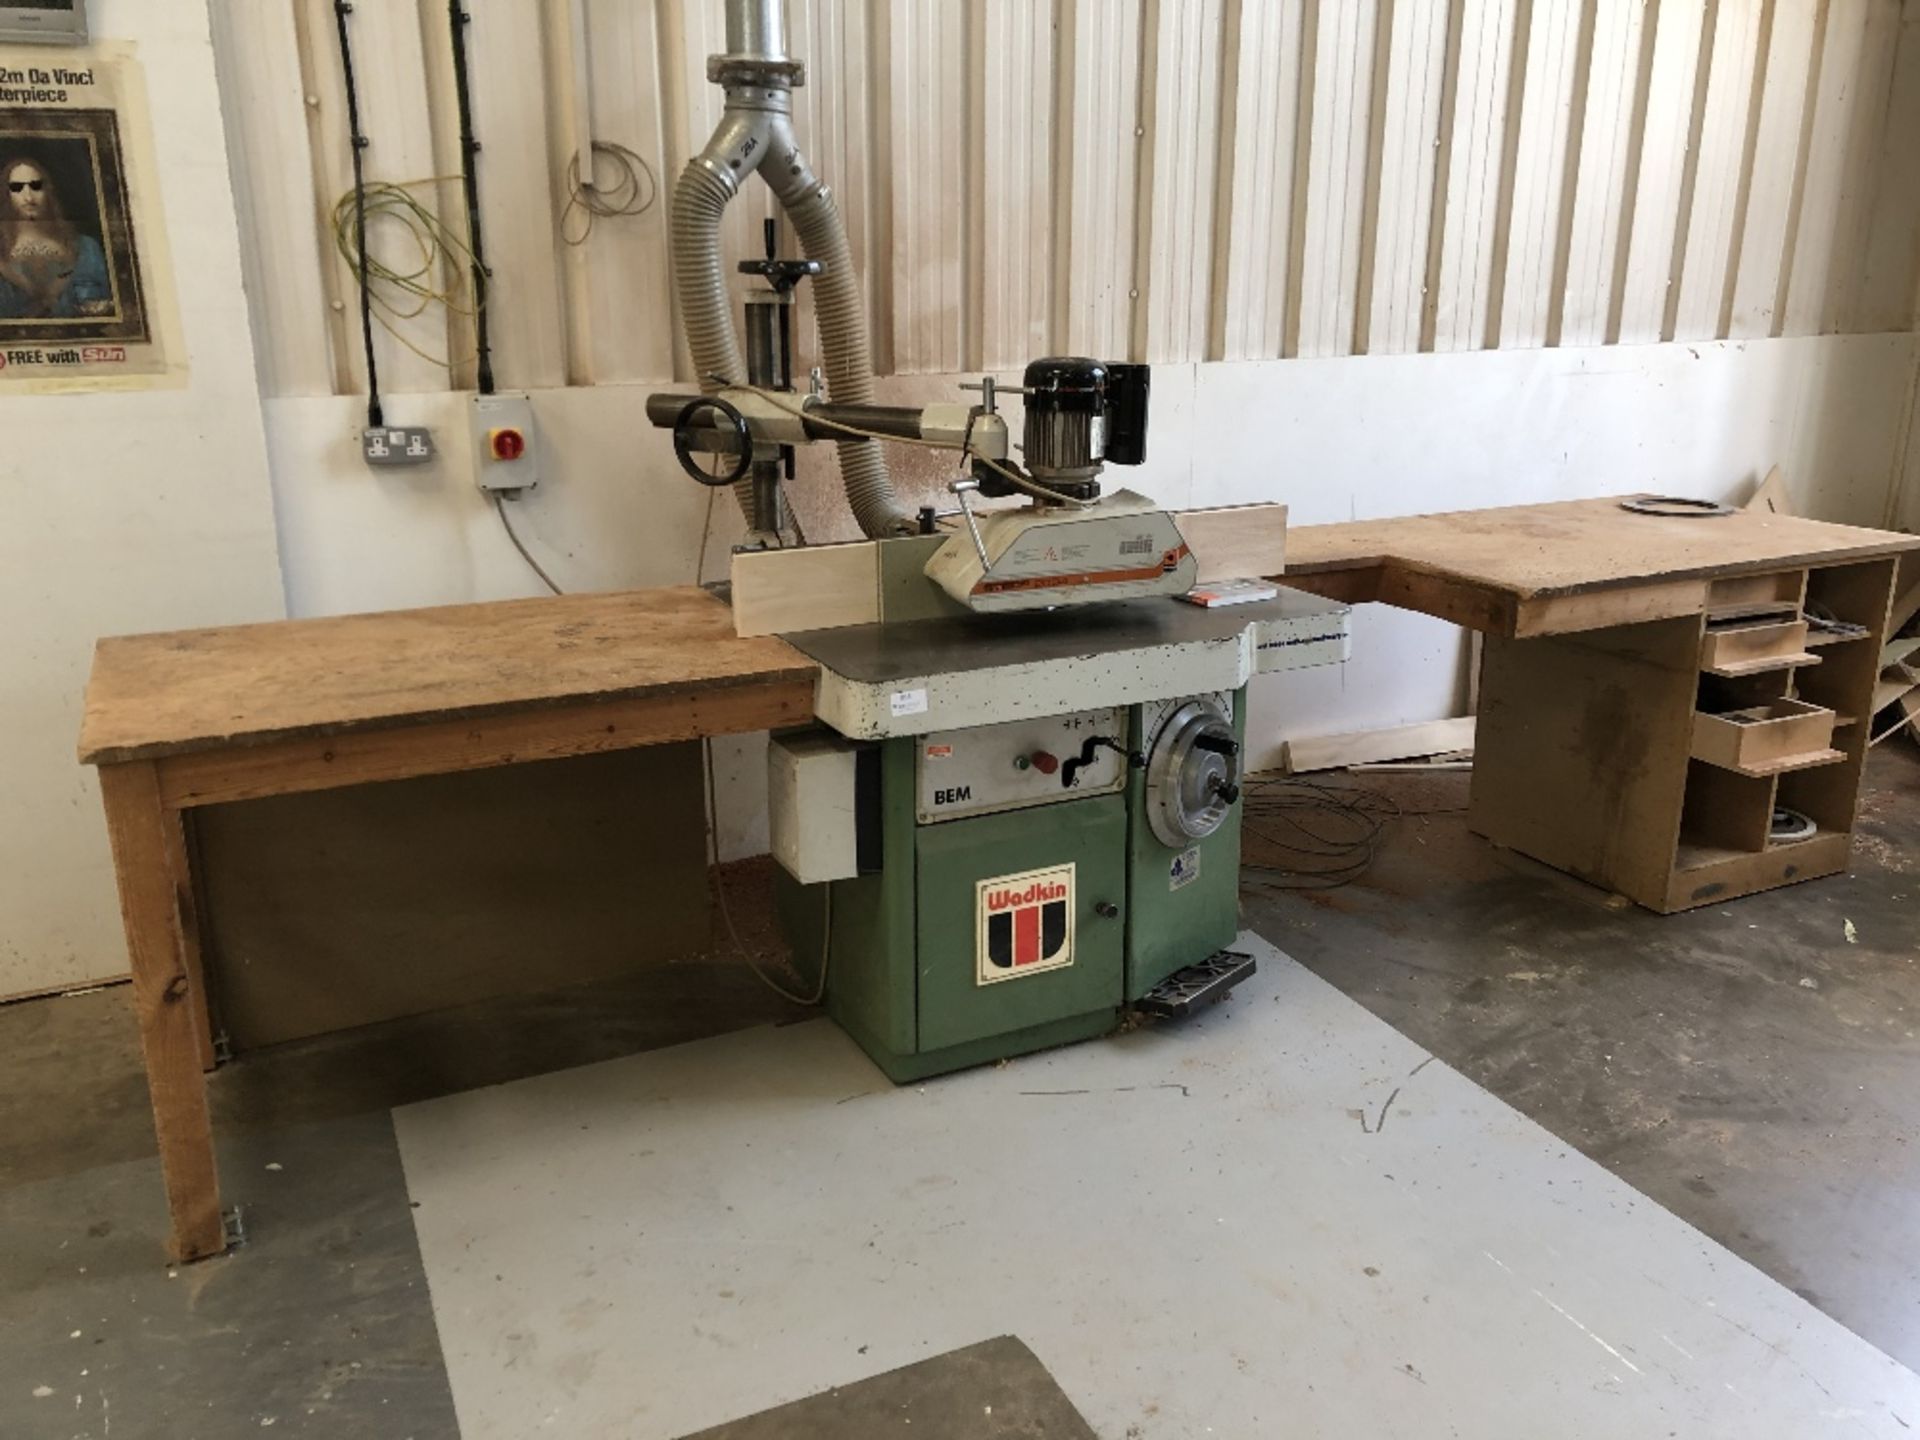 Wadkin BEM Spindle Moulder with Maggi STEFF 2034 Power Feed